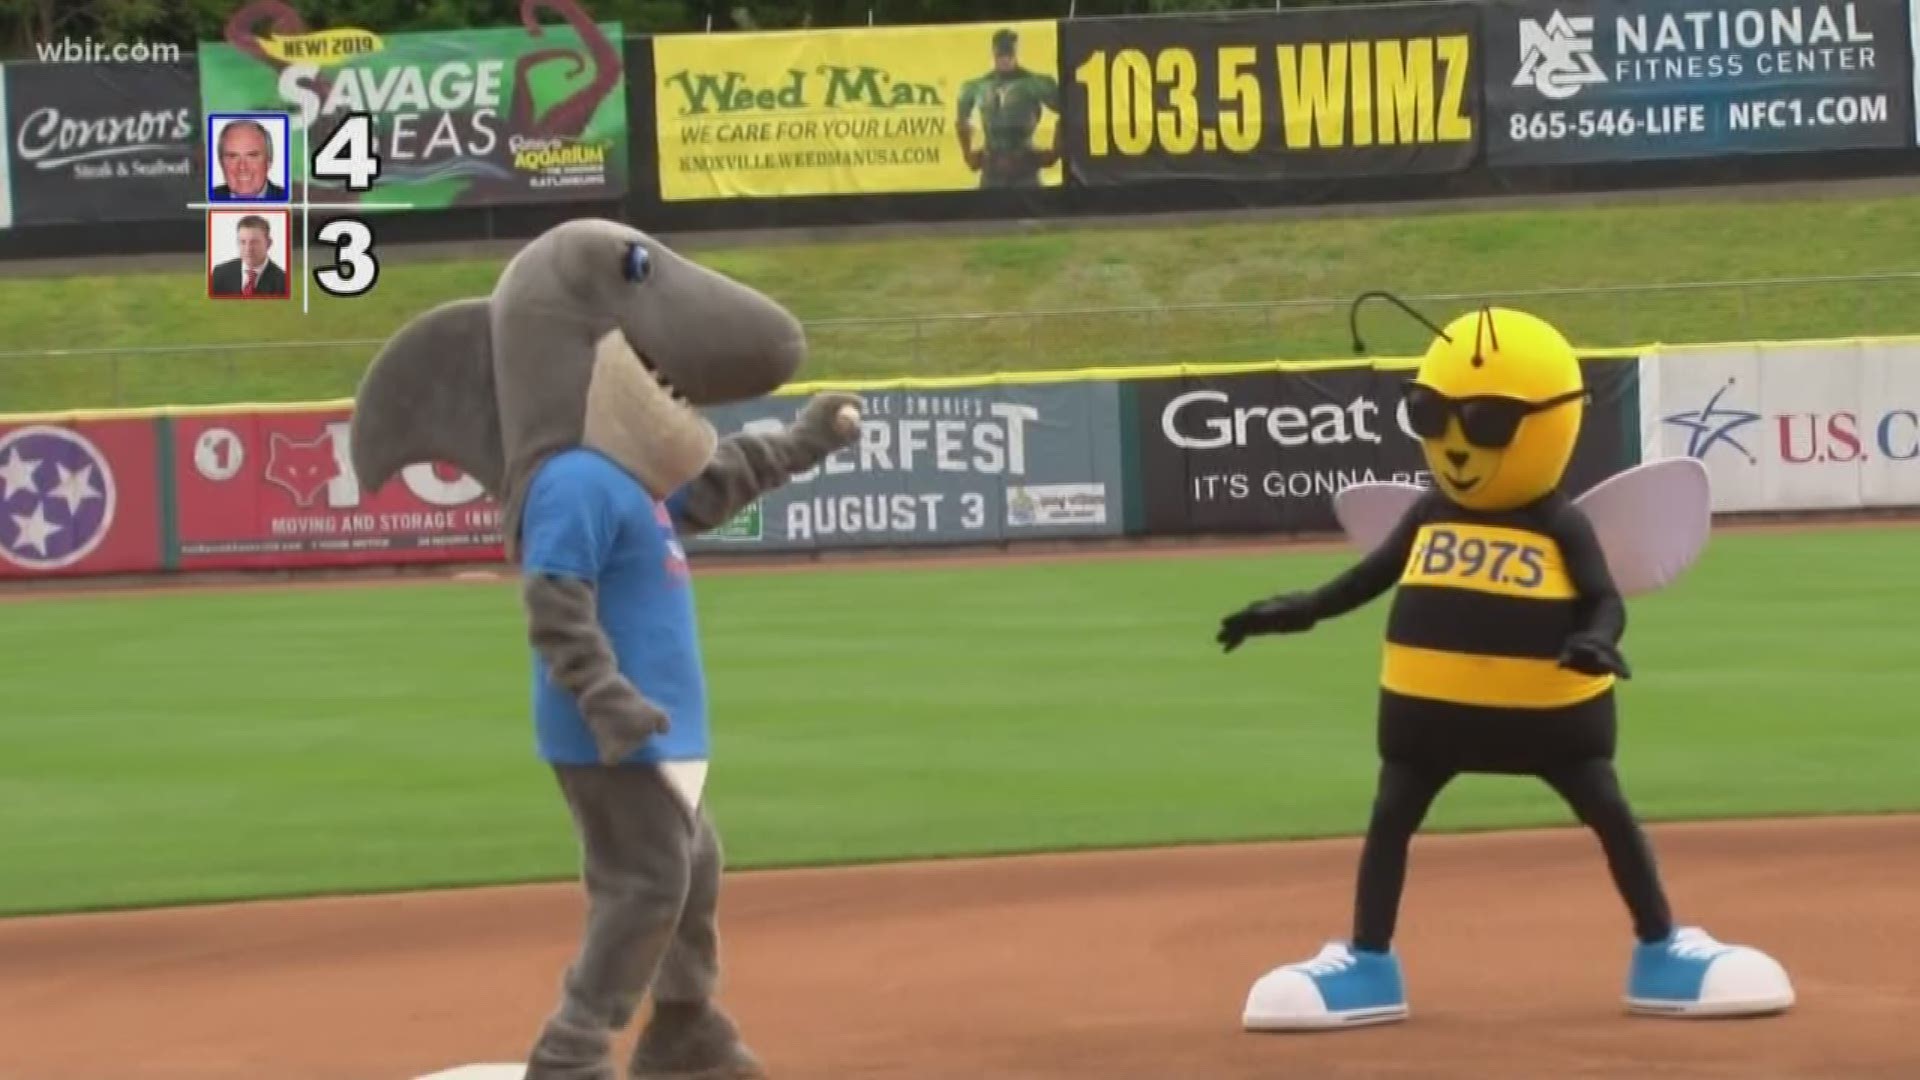 Will there be a comeback? Check out the final inning to see who scores, who strikes out, and who wins the 57th annual Mascot Baseball Game.